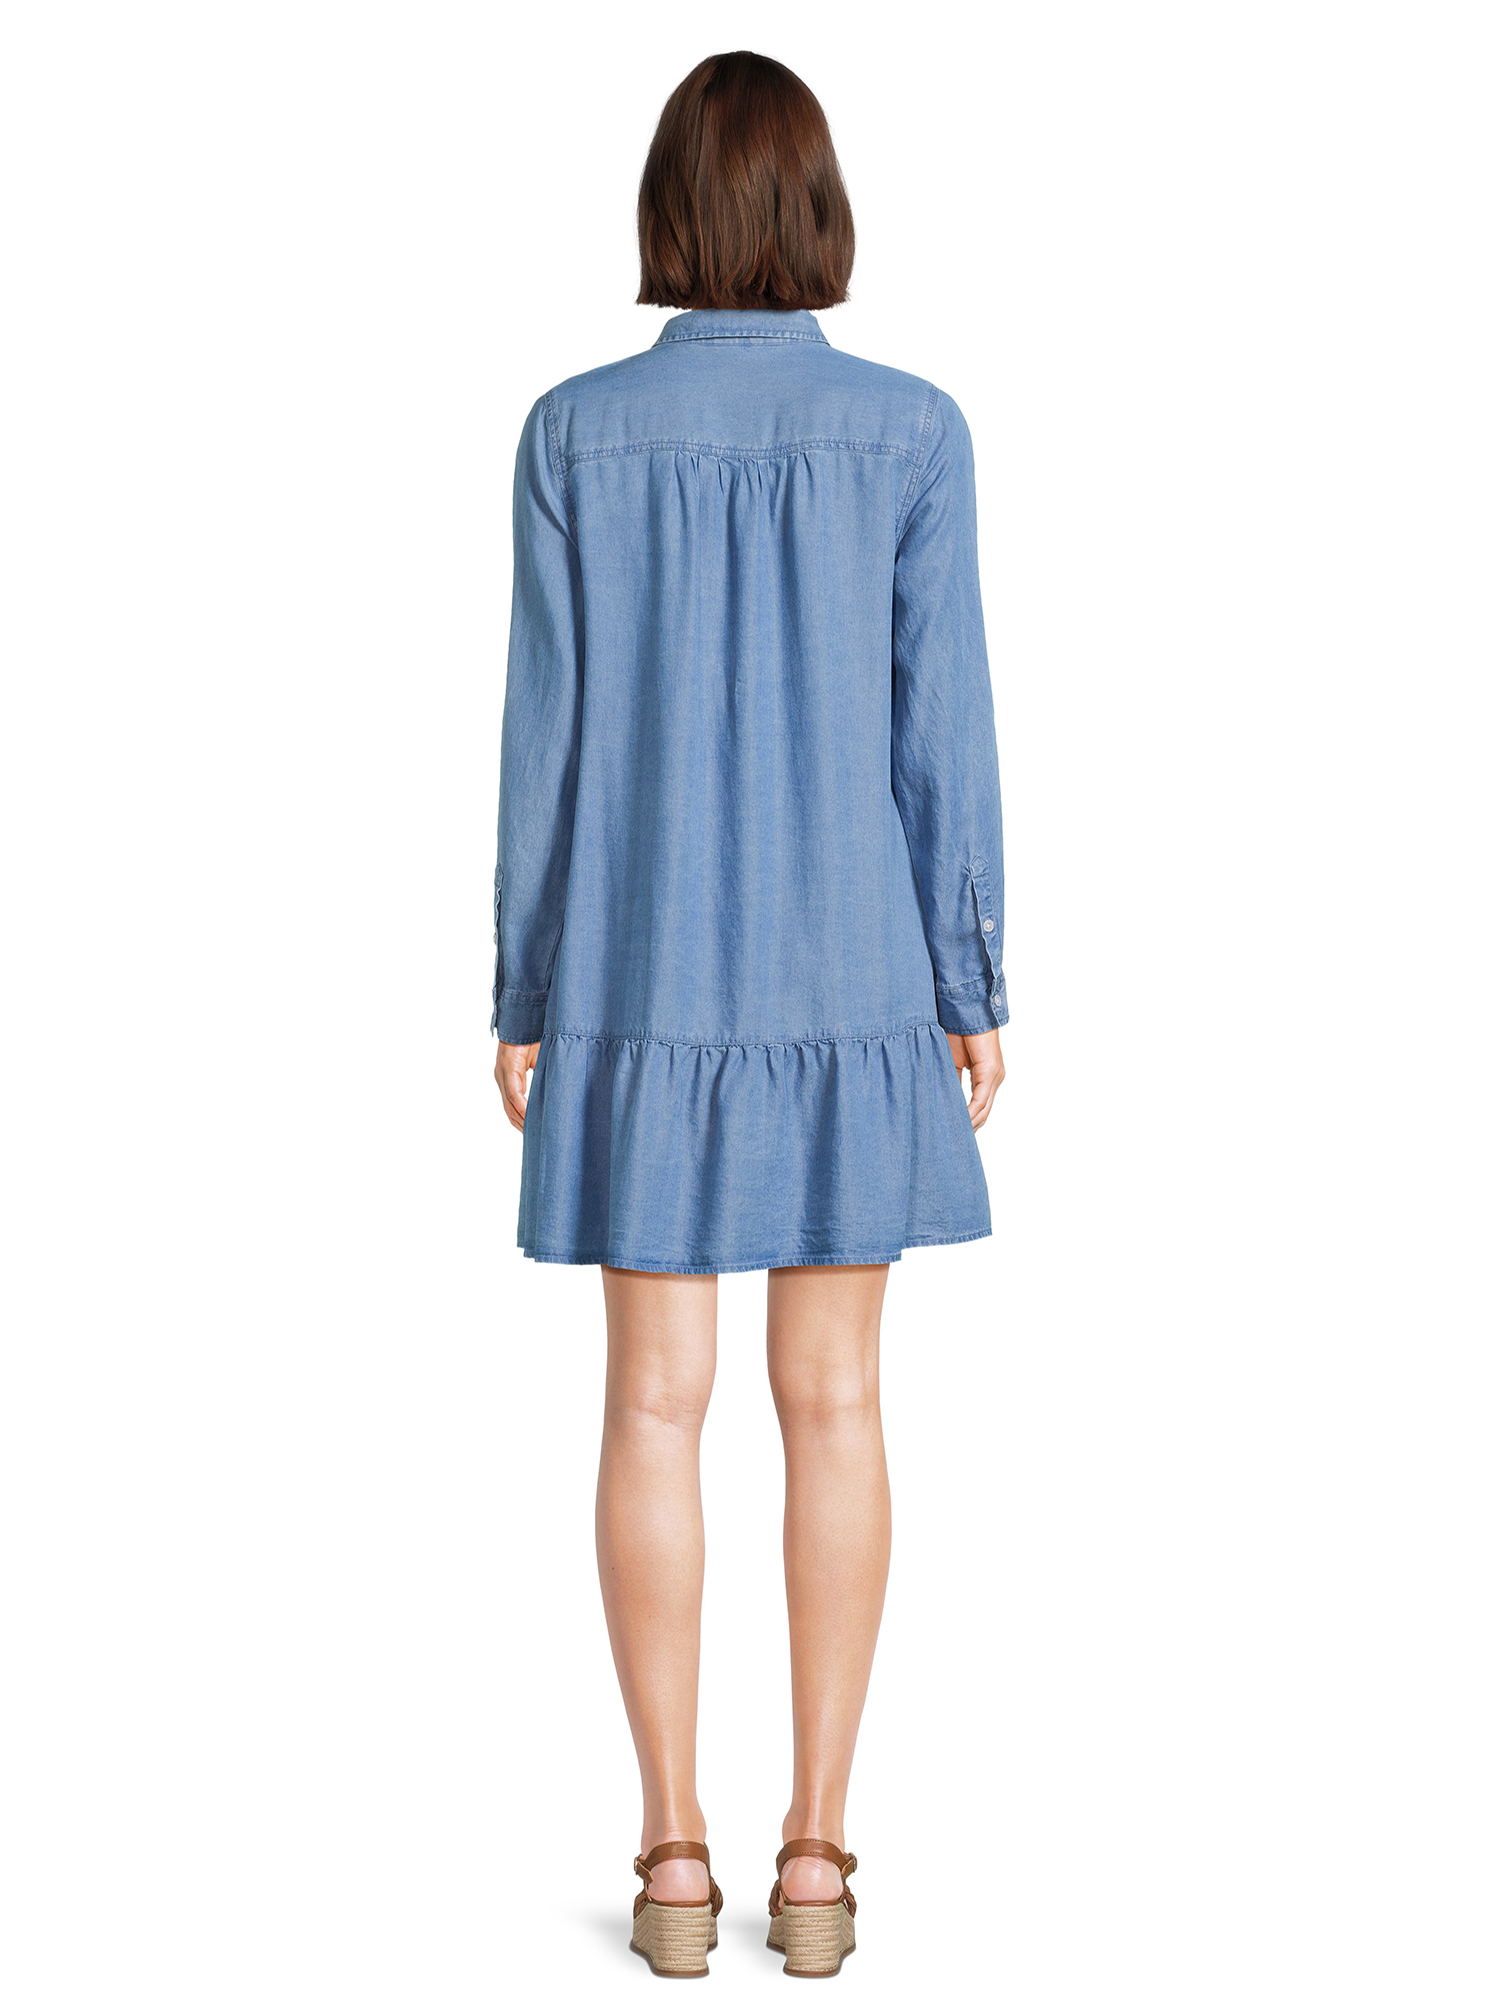 Time and Tru Women's Mini Shirt Dress with Long Sleeves, Sizes XS-3XL - image 2 of 5